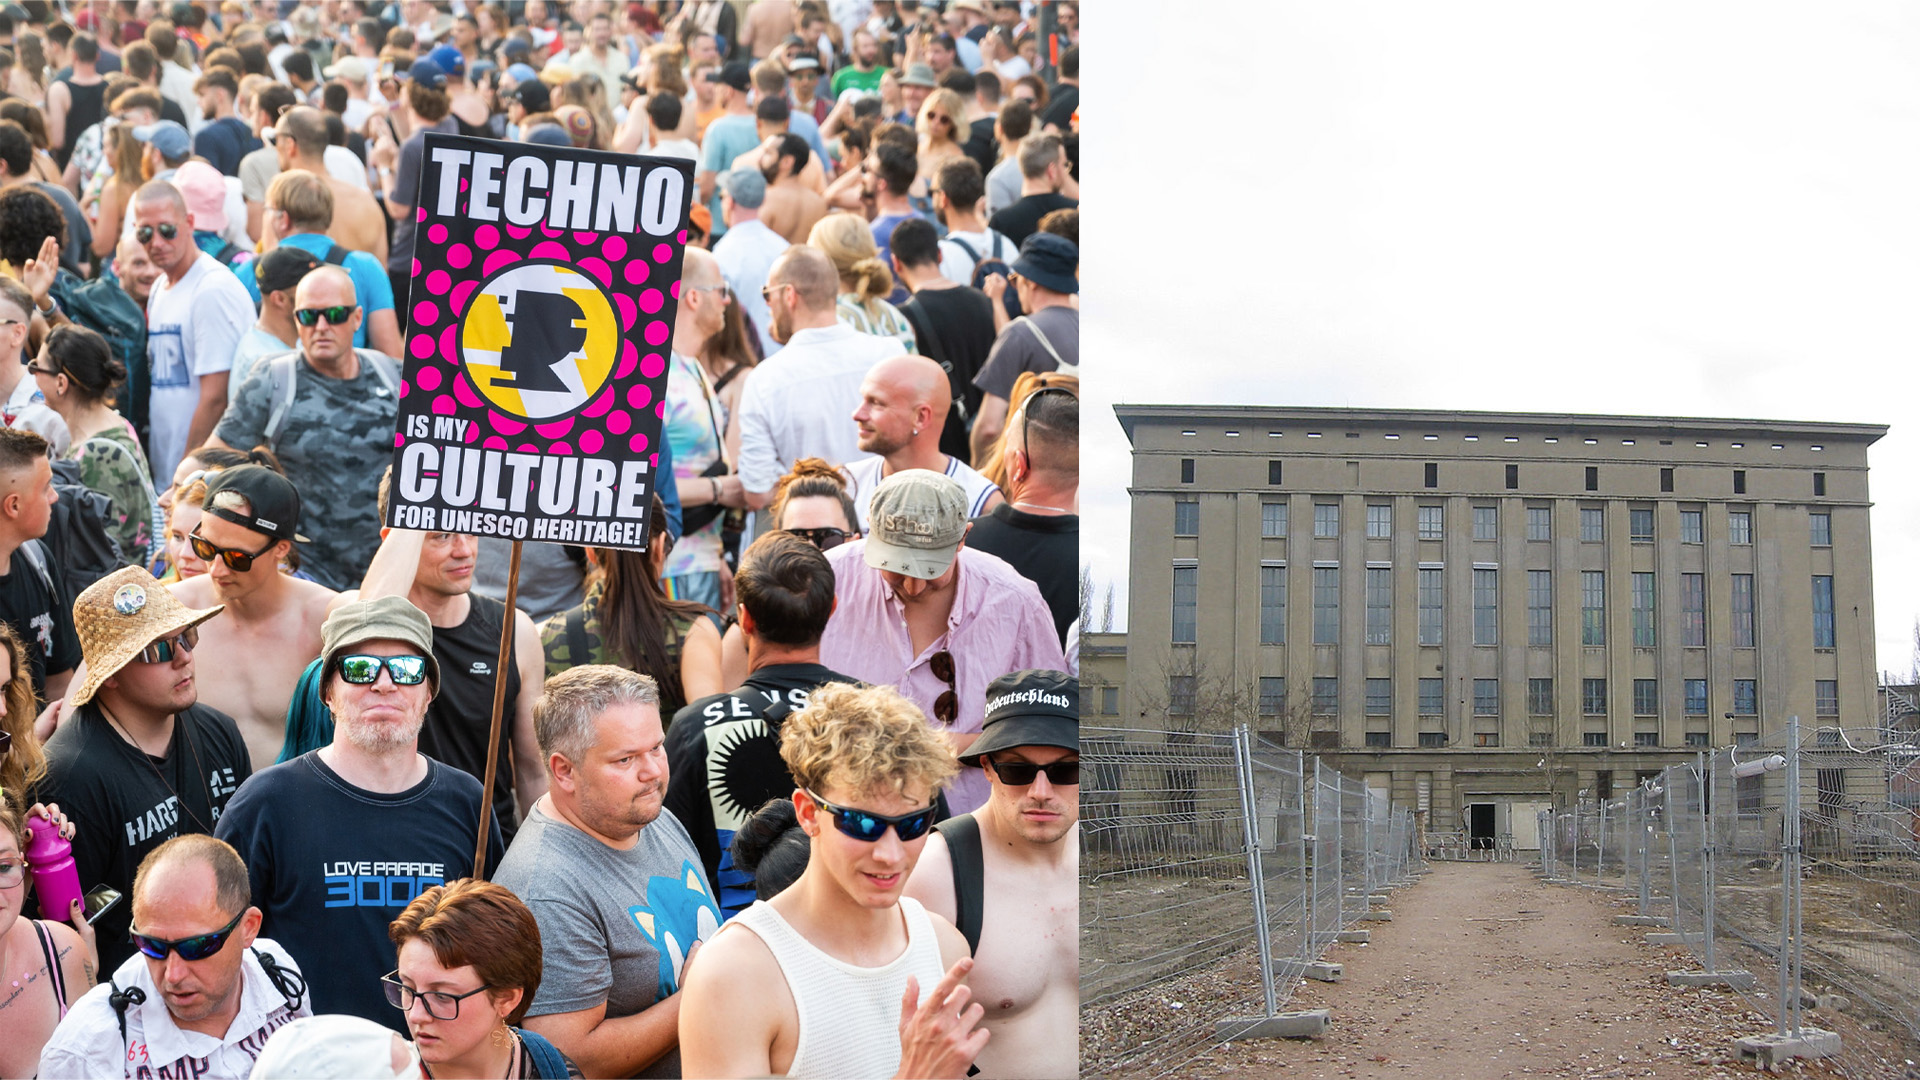 Berlin Techno Added to UNESCO Intangible Cultural Heritage List